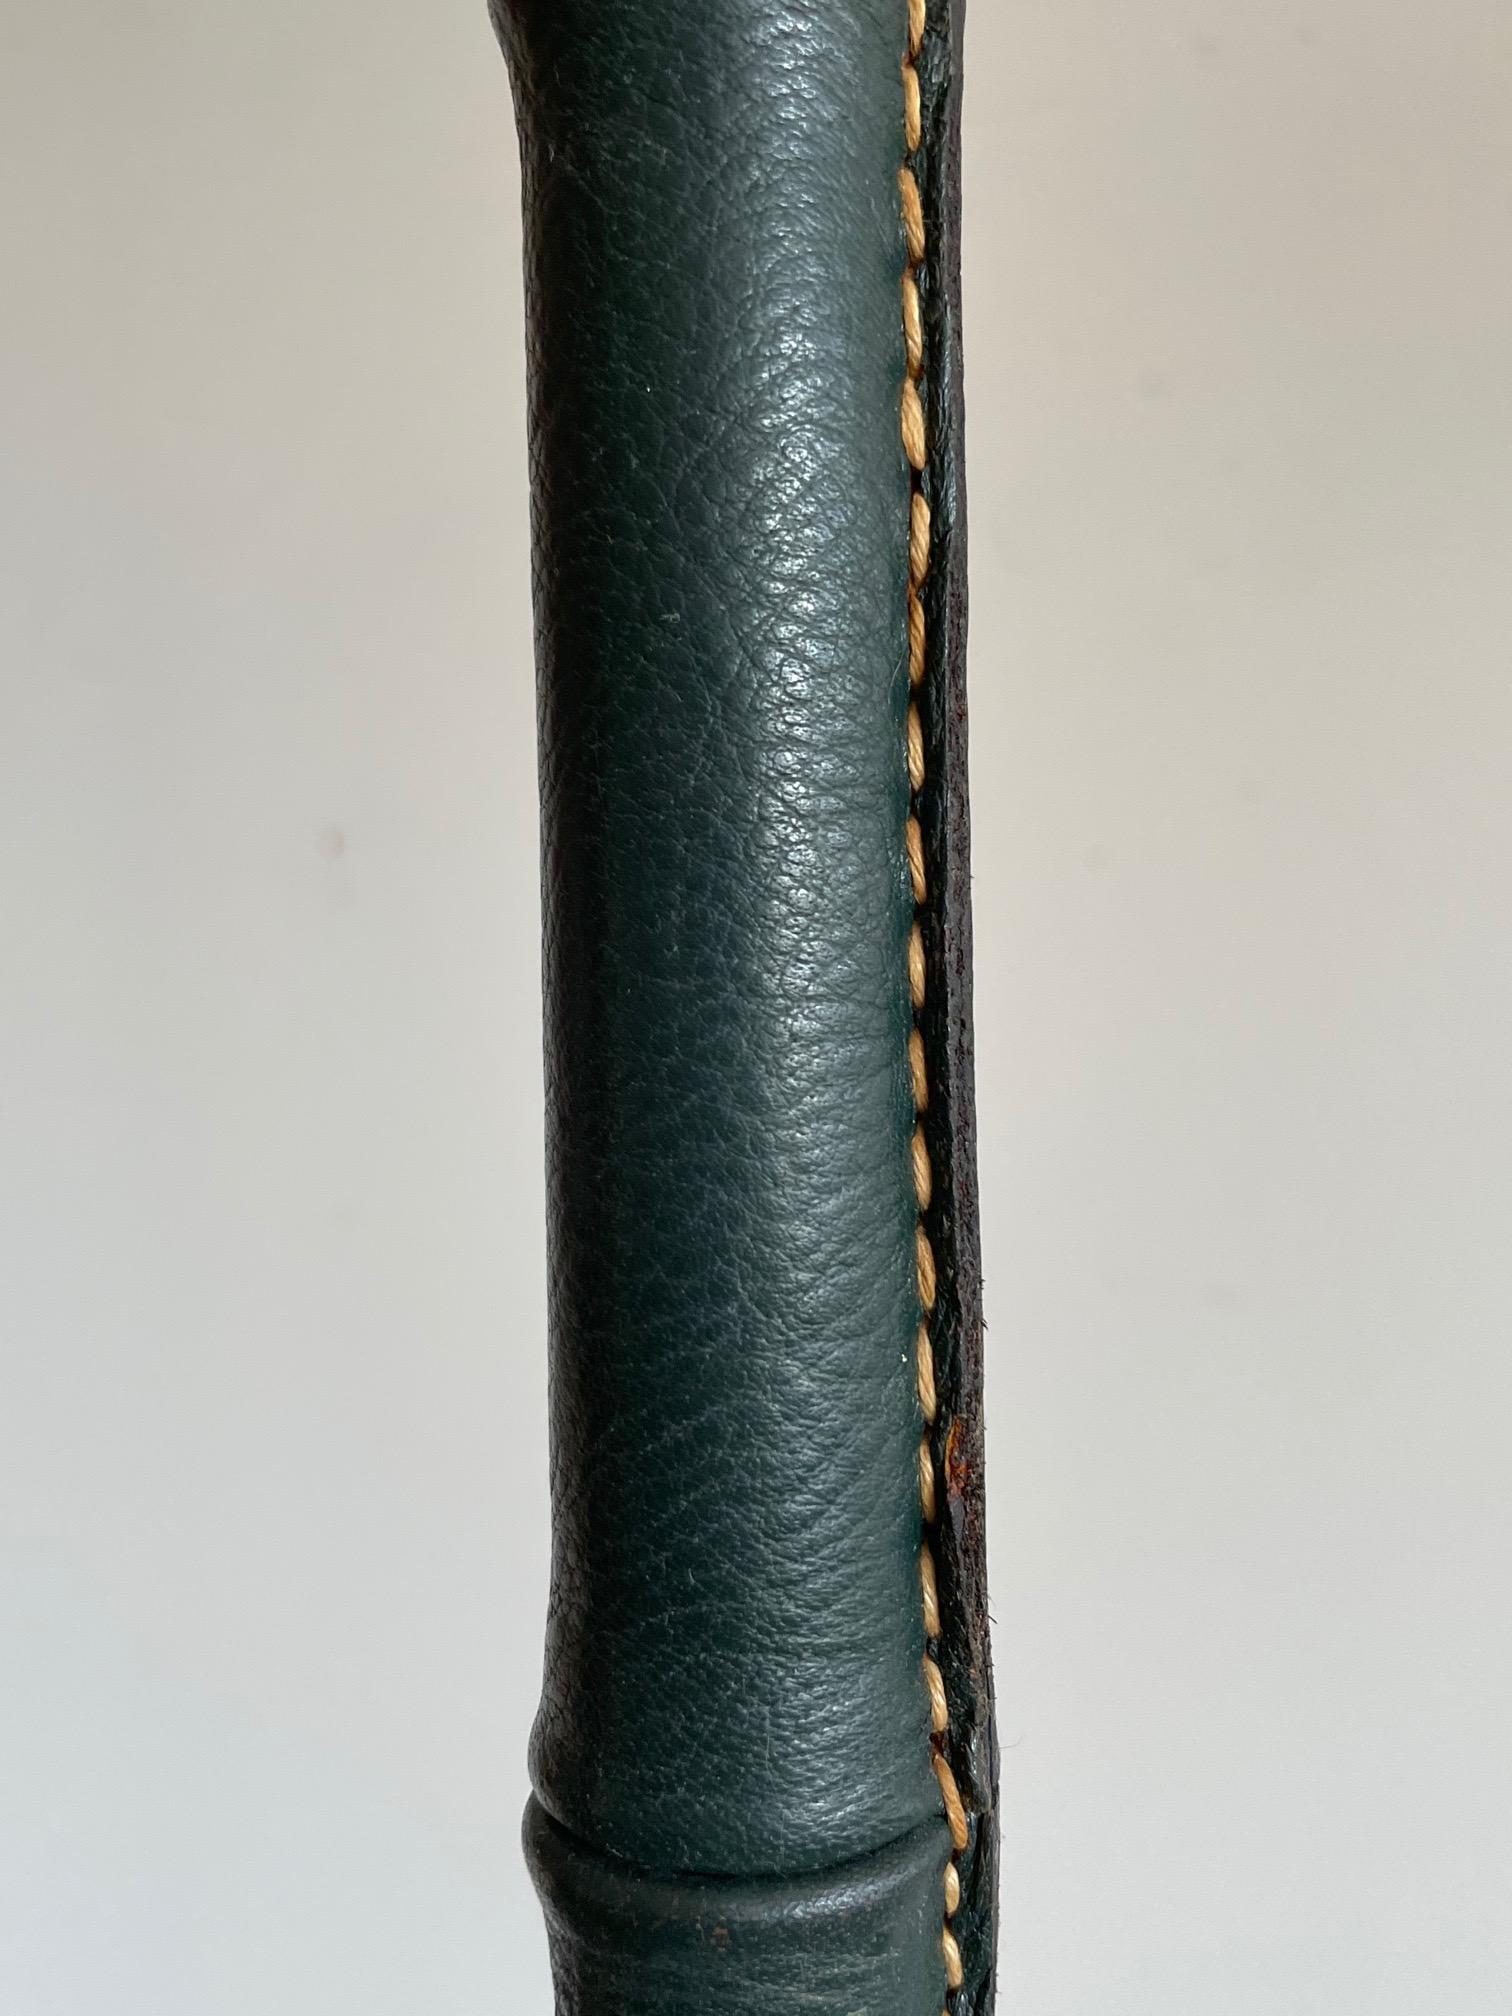 A Jacques Adnet Floorlamp in Original Green Leather For Sale 8